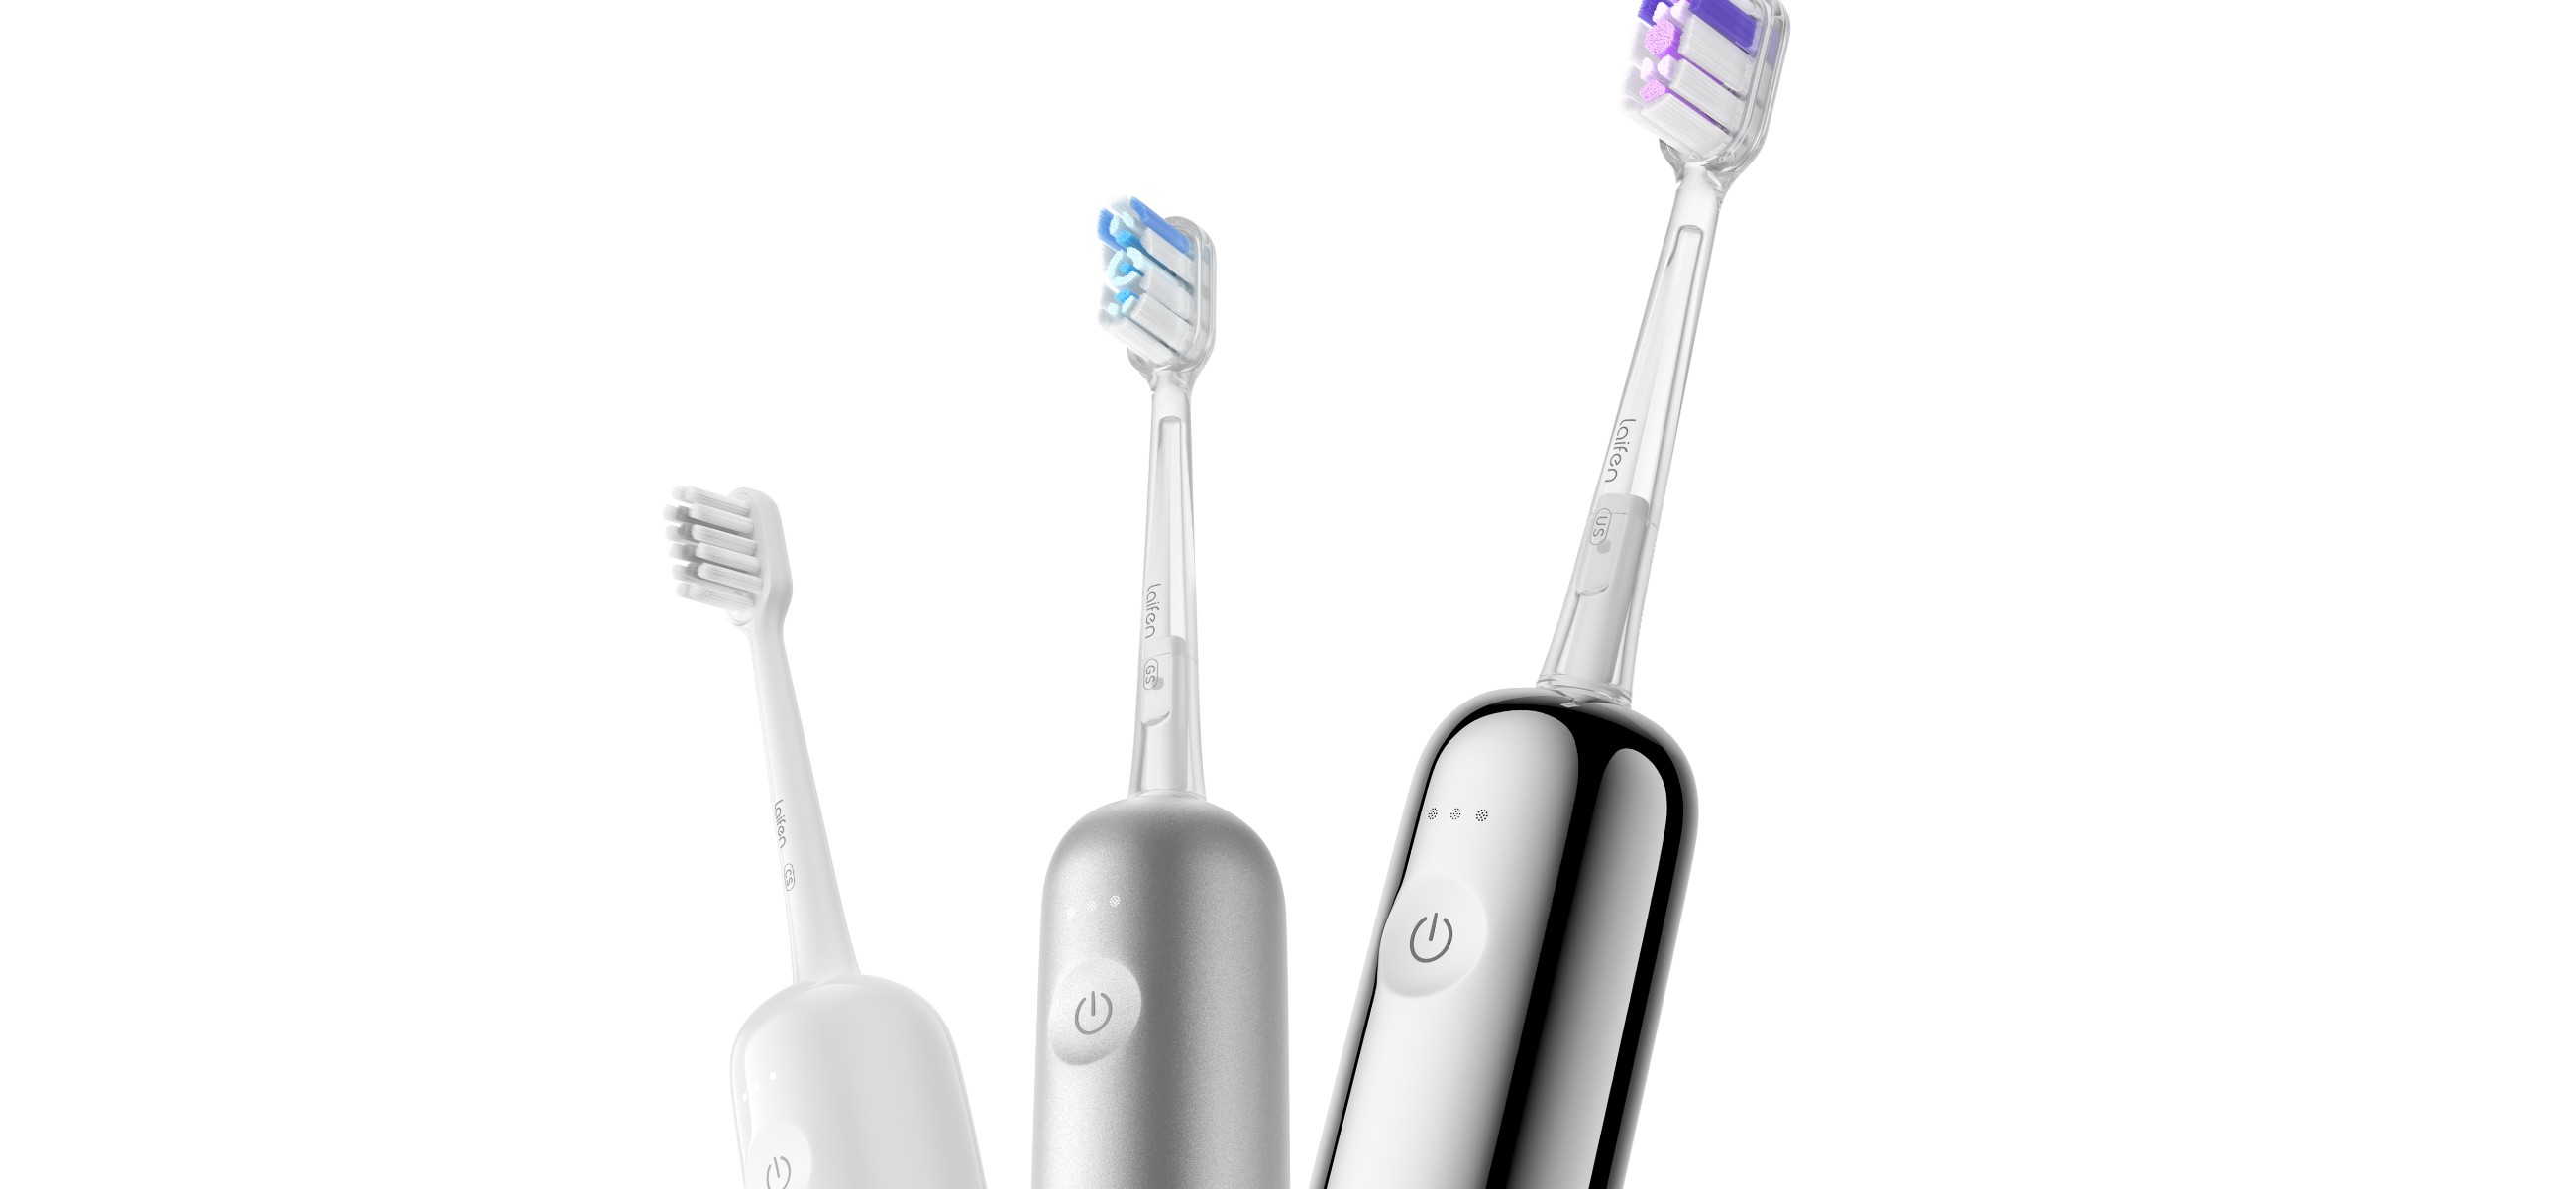 Is oscillating toothbrush better than other electric toothbrush types?